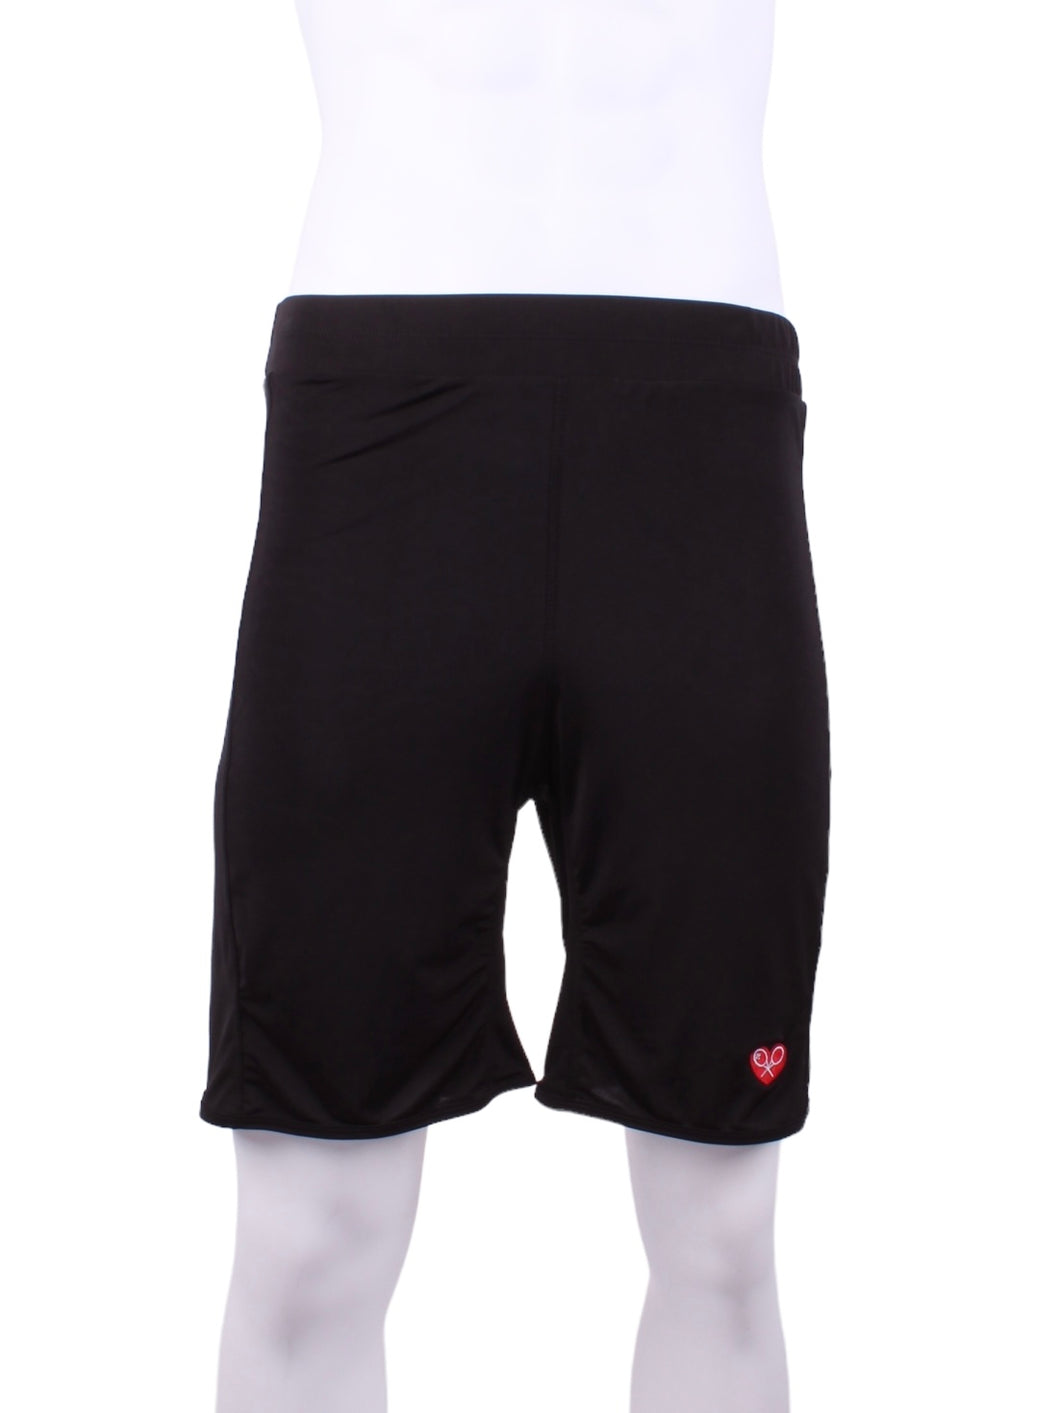 This is our limited edition Short Men’s Shorts Black.  This piece has a silky and soft fabric.   We make these in very small quantities - by design.  Unique.  Luxurious.  Comfortable.  Cool.  Fun.